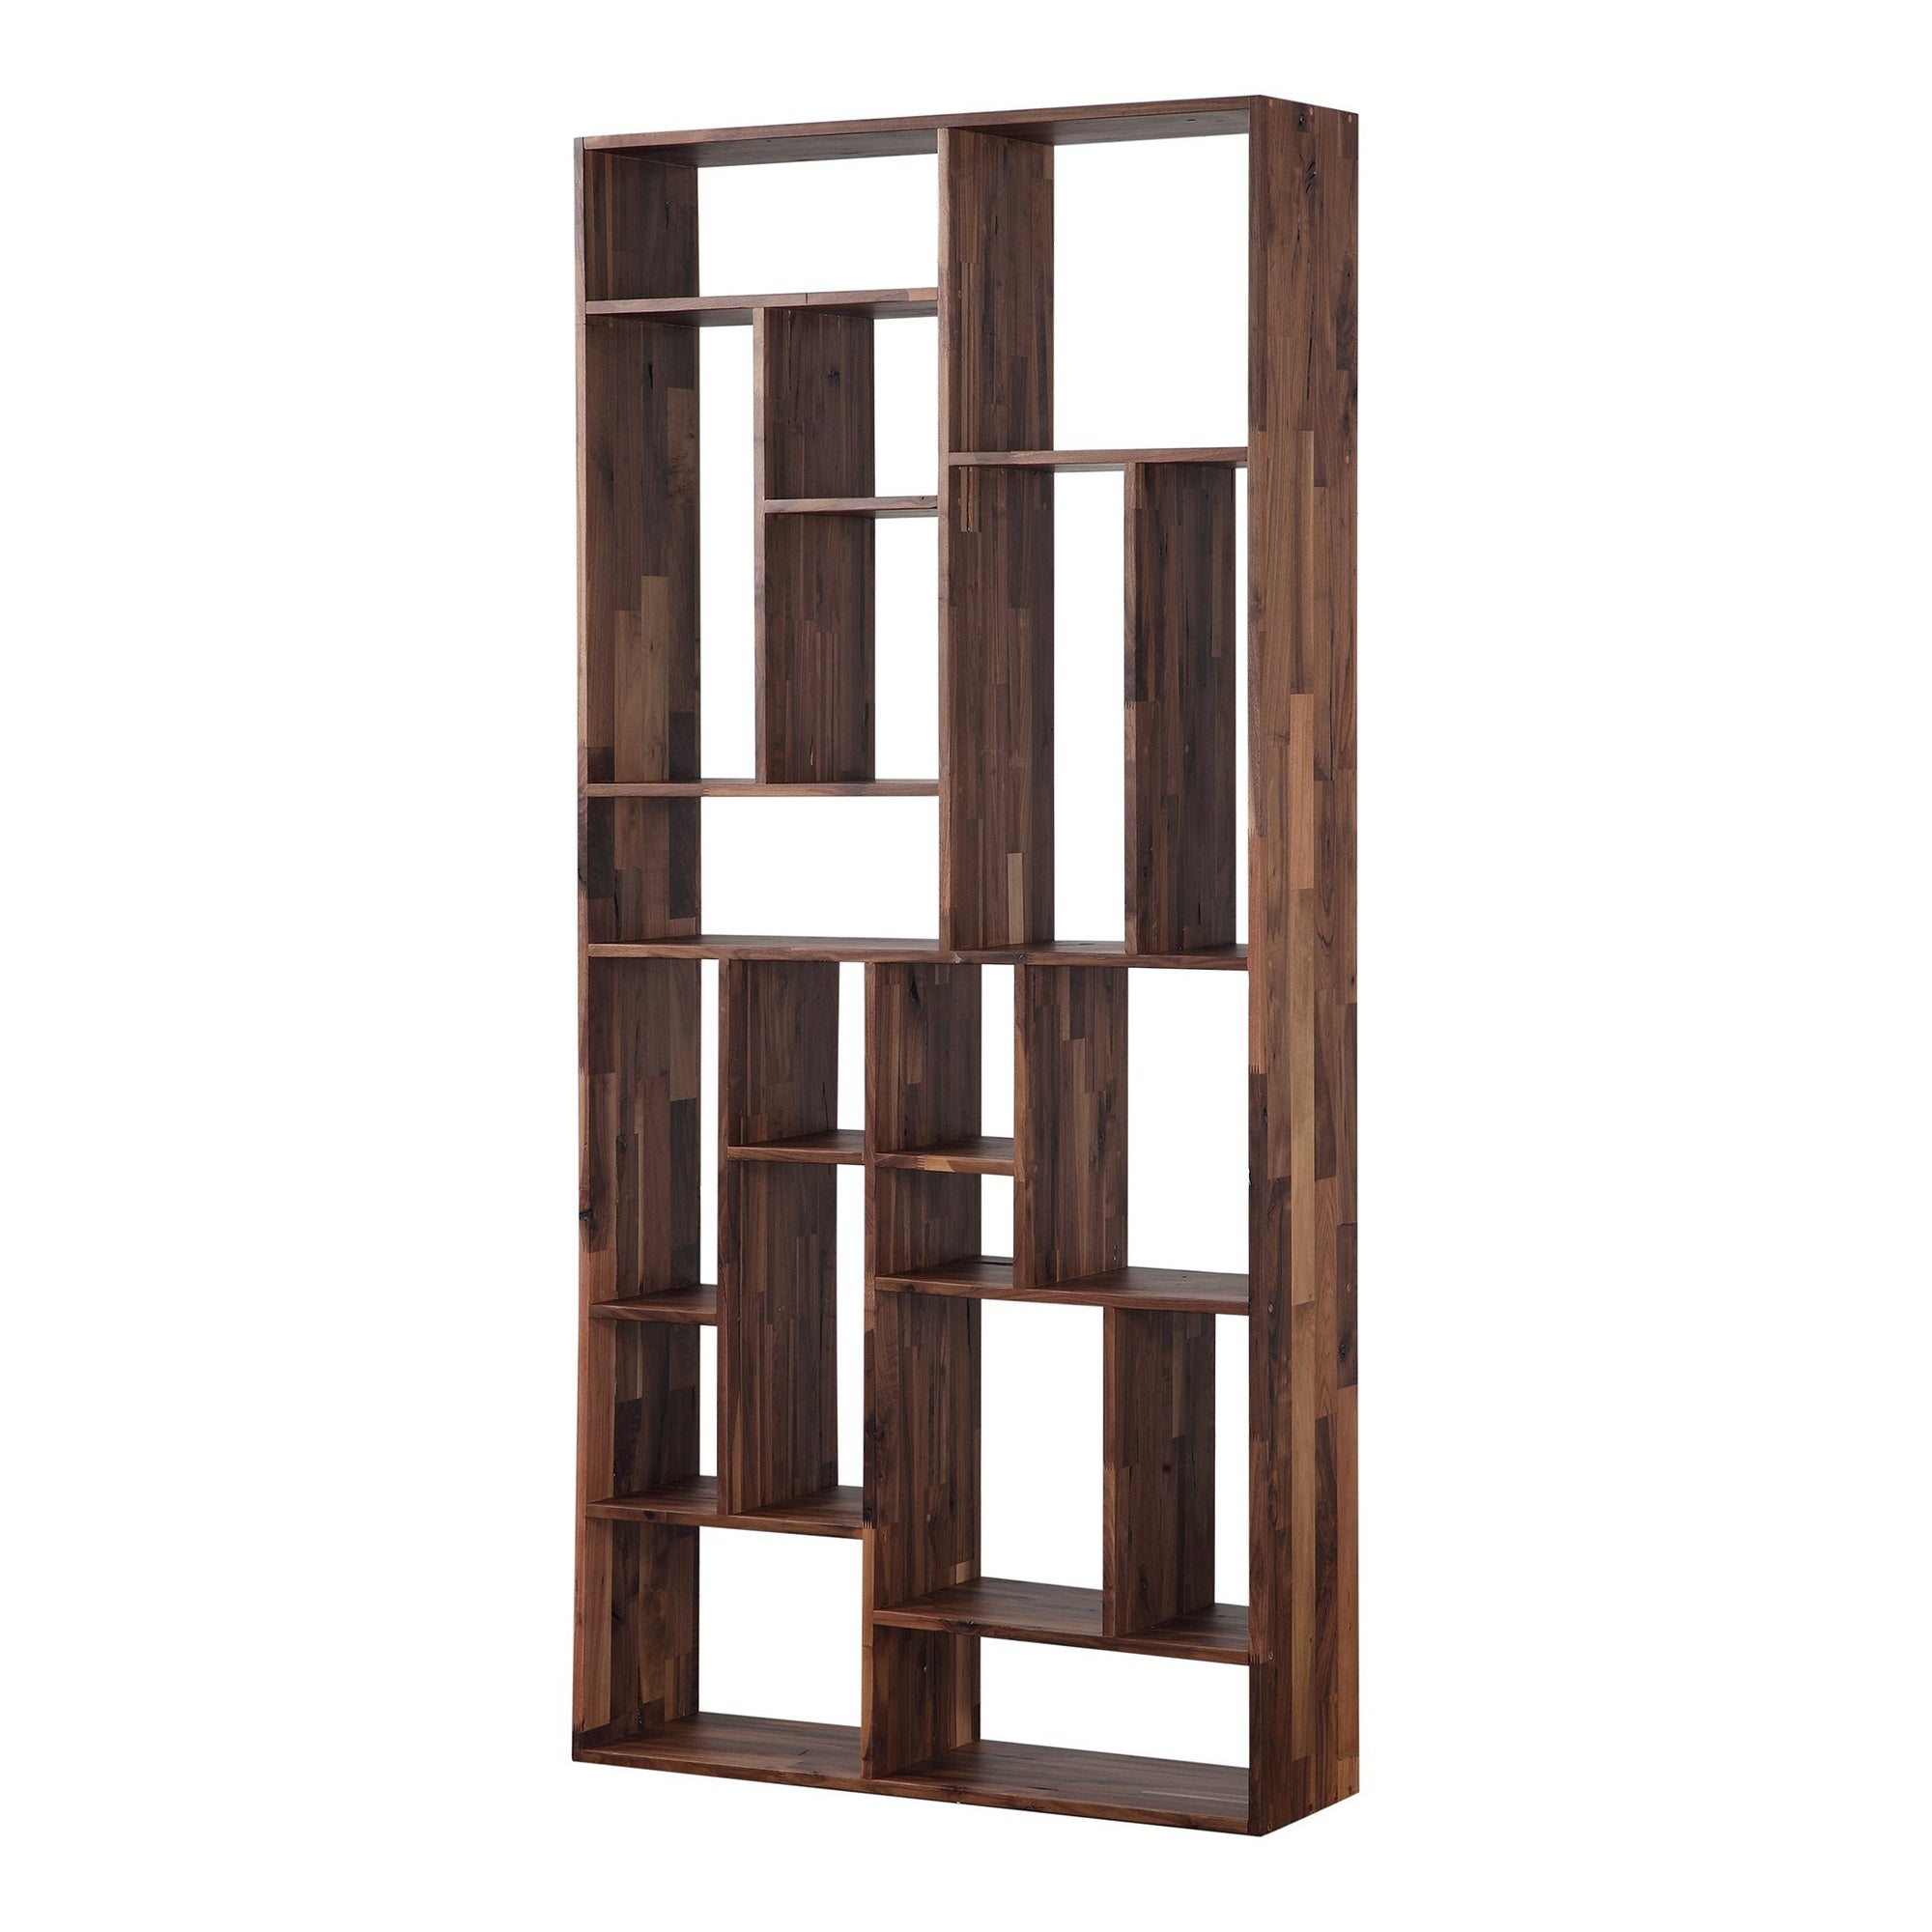 MOES-REDEMPTION SHELF SOLID LARGE-Bookcases & Shelving-MODTEMPO